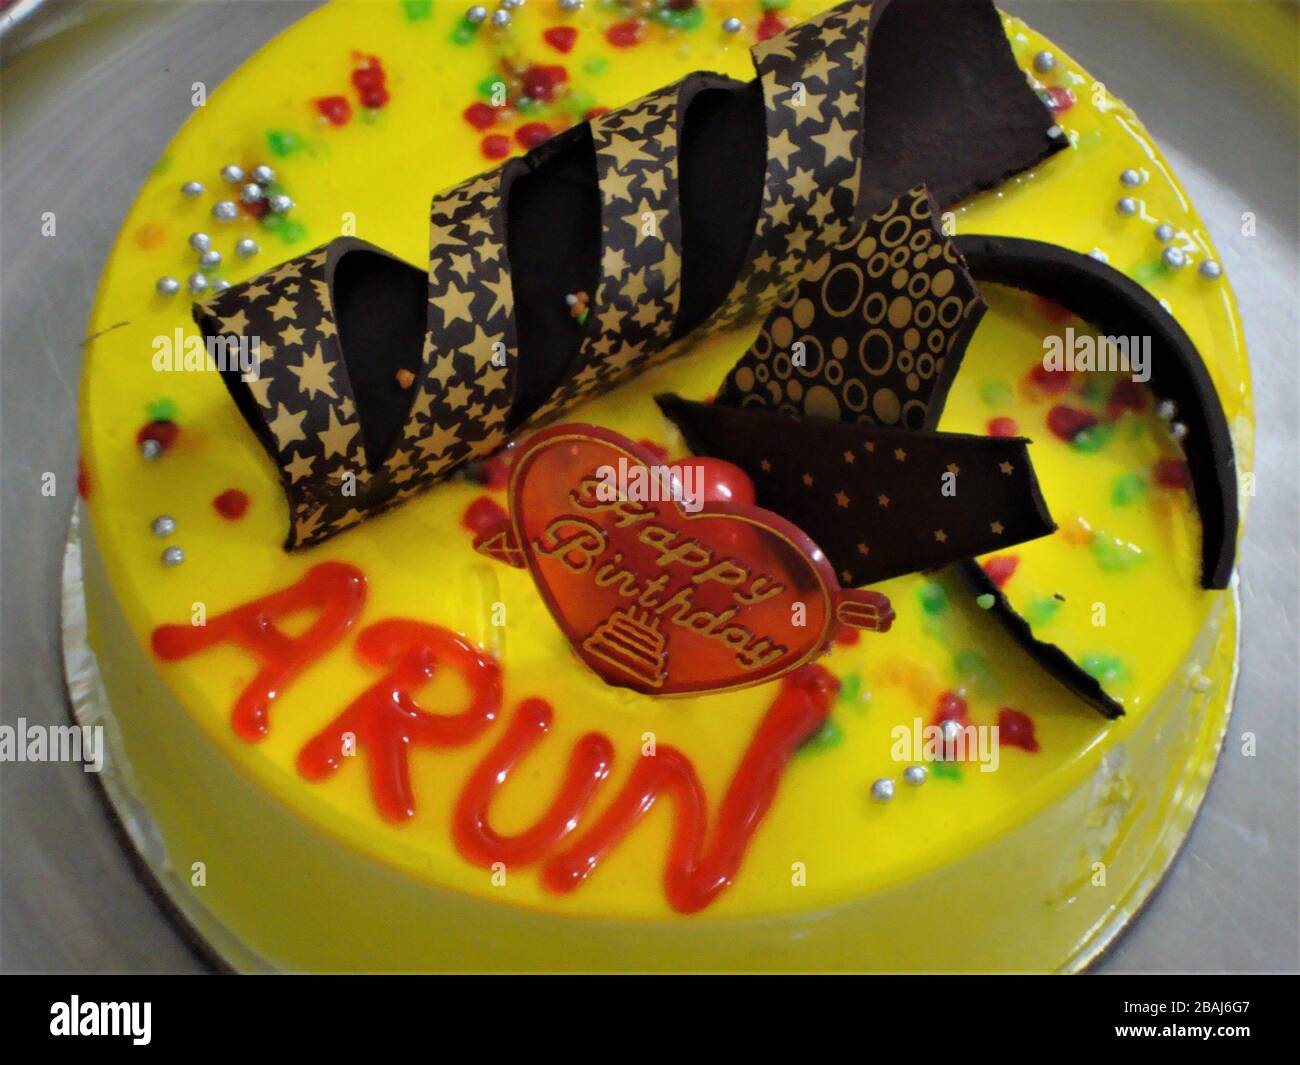 Yummy pine apple birthday cake in yellow flavor with chocolate ...